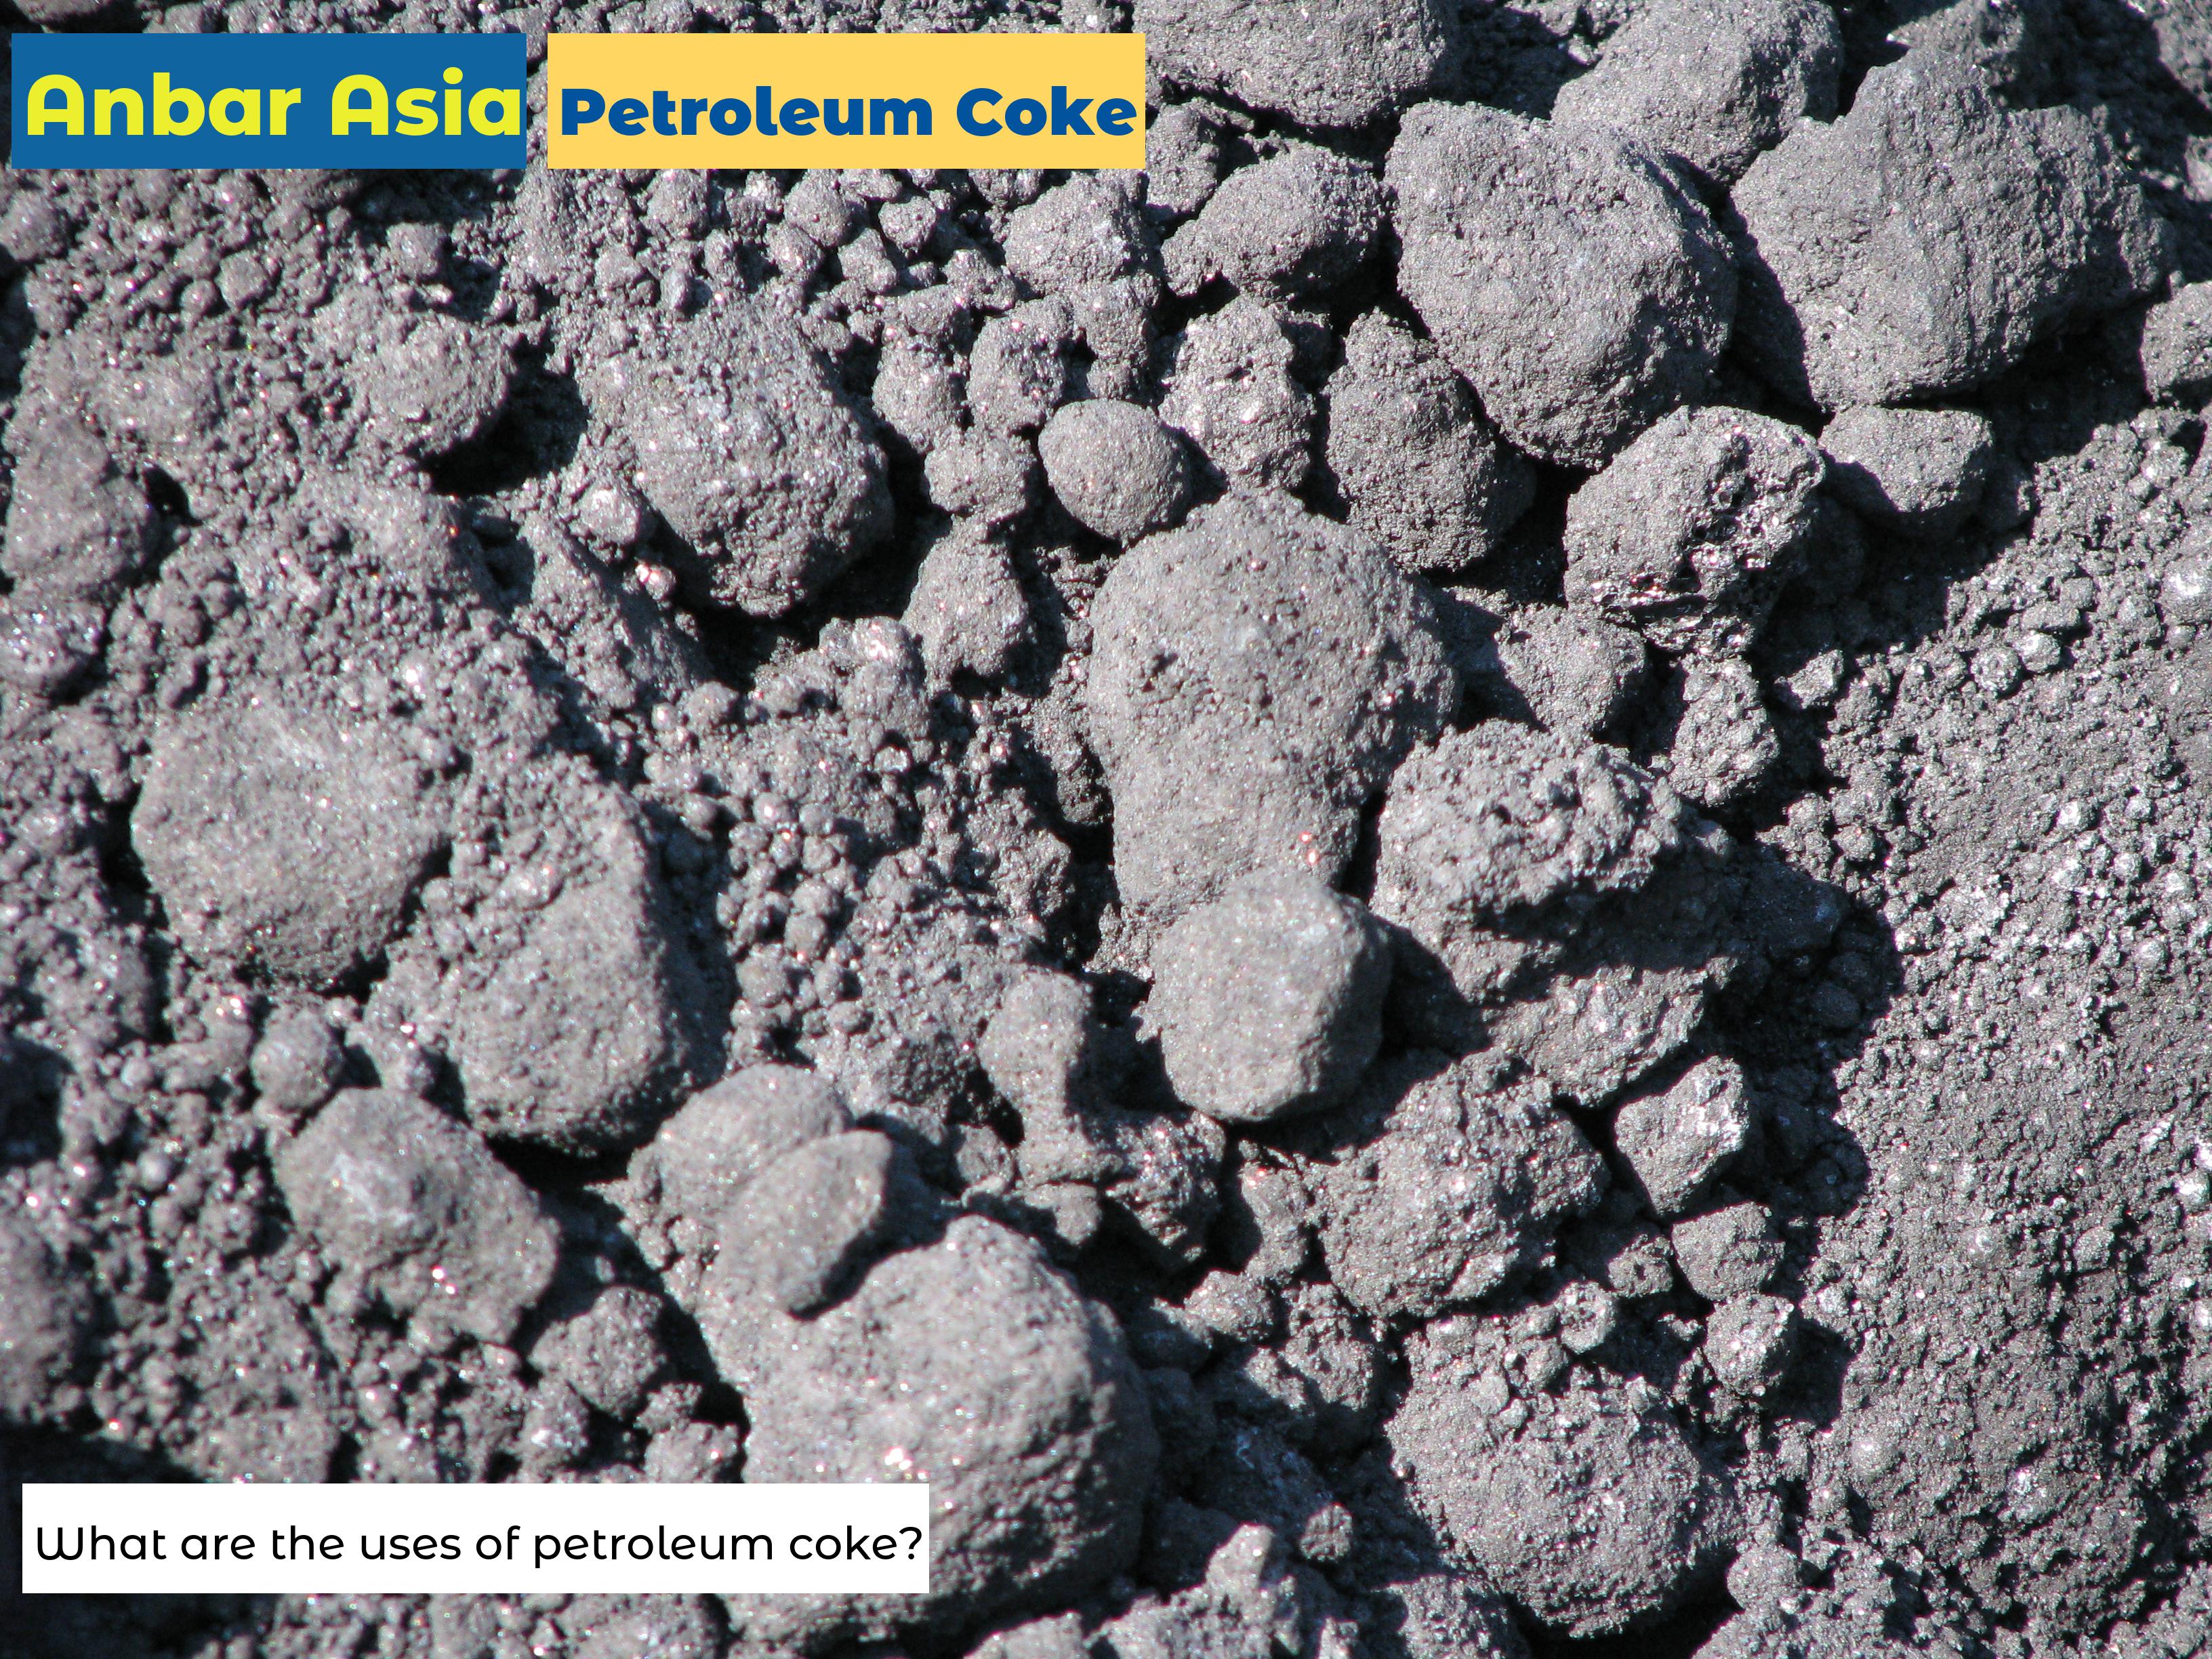 What are the uses of petroleum coke?